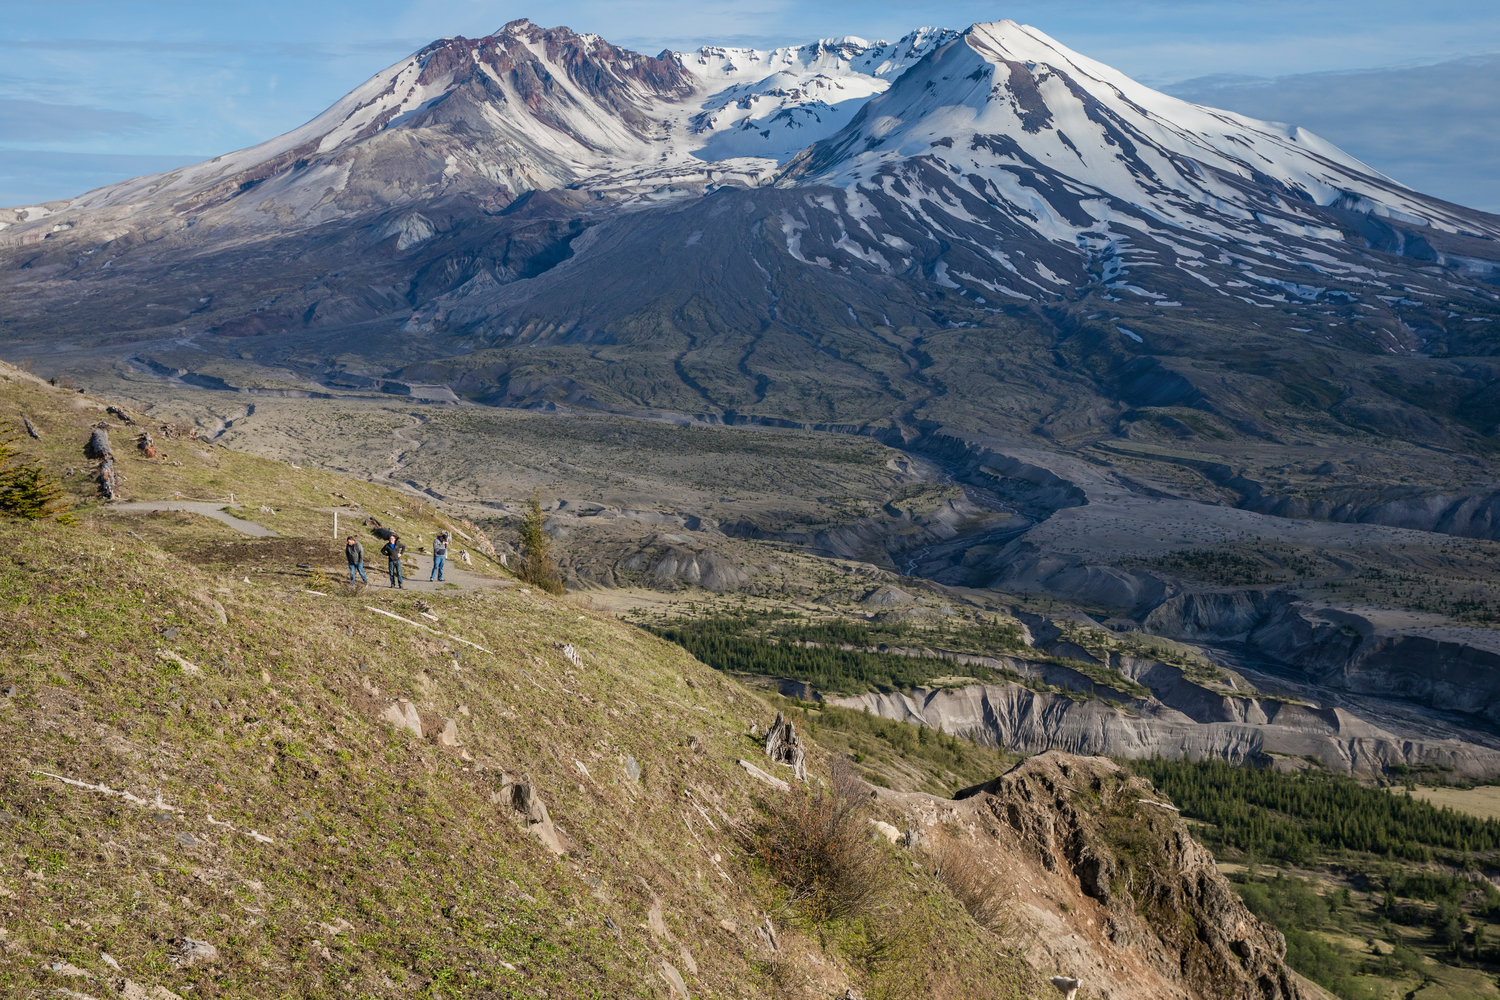 Hikers and mountain goats look on from the Mount Margaret Backcountry in the Gifford Pinchot National Forest on Wednesday near Mount St. Helens.